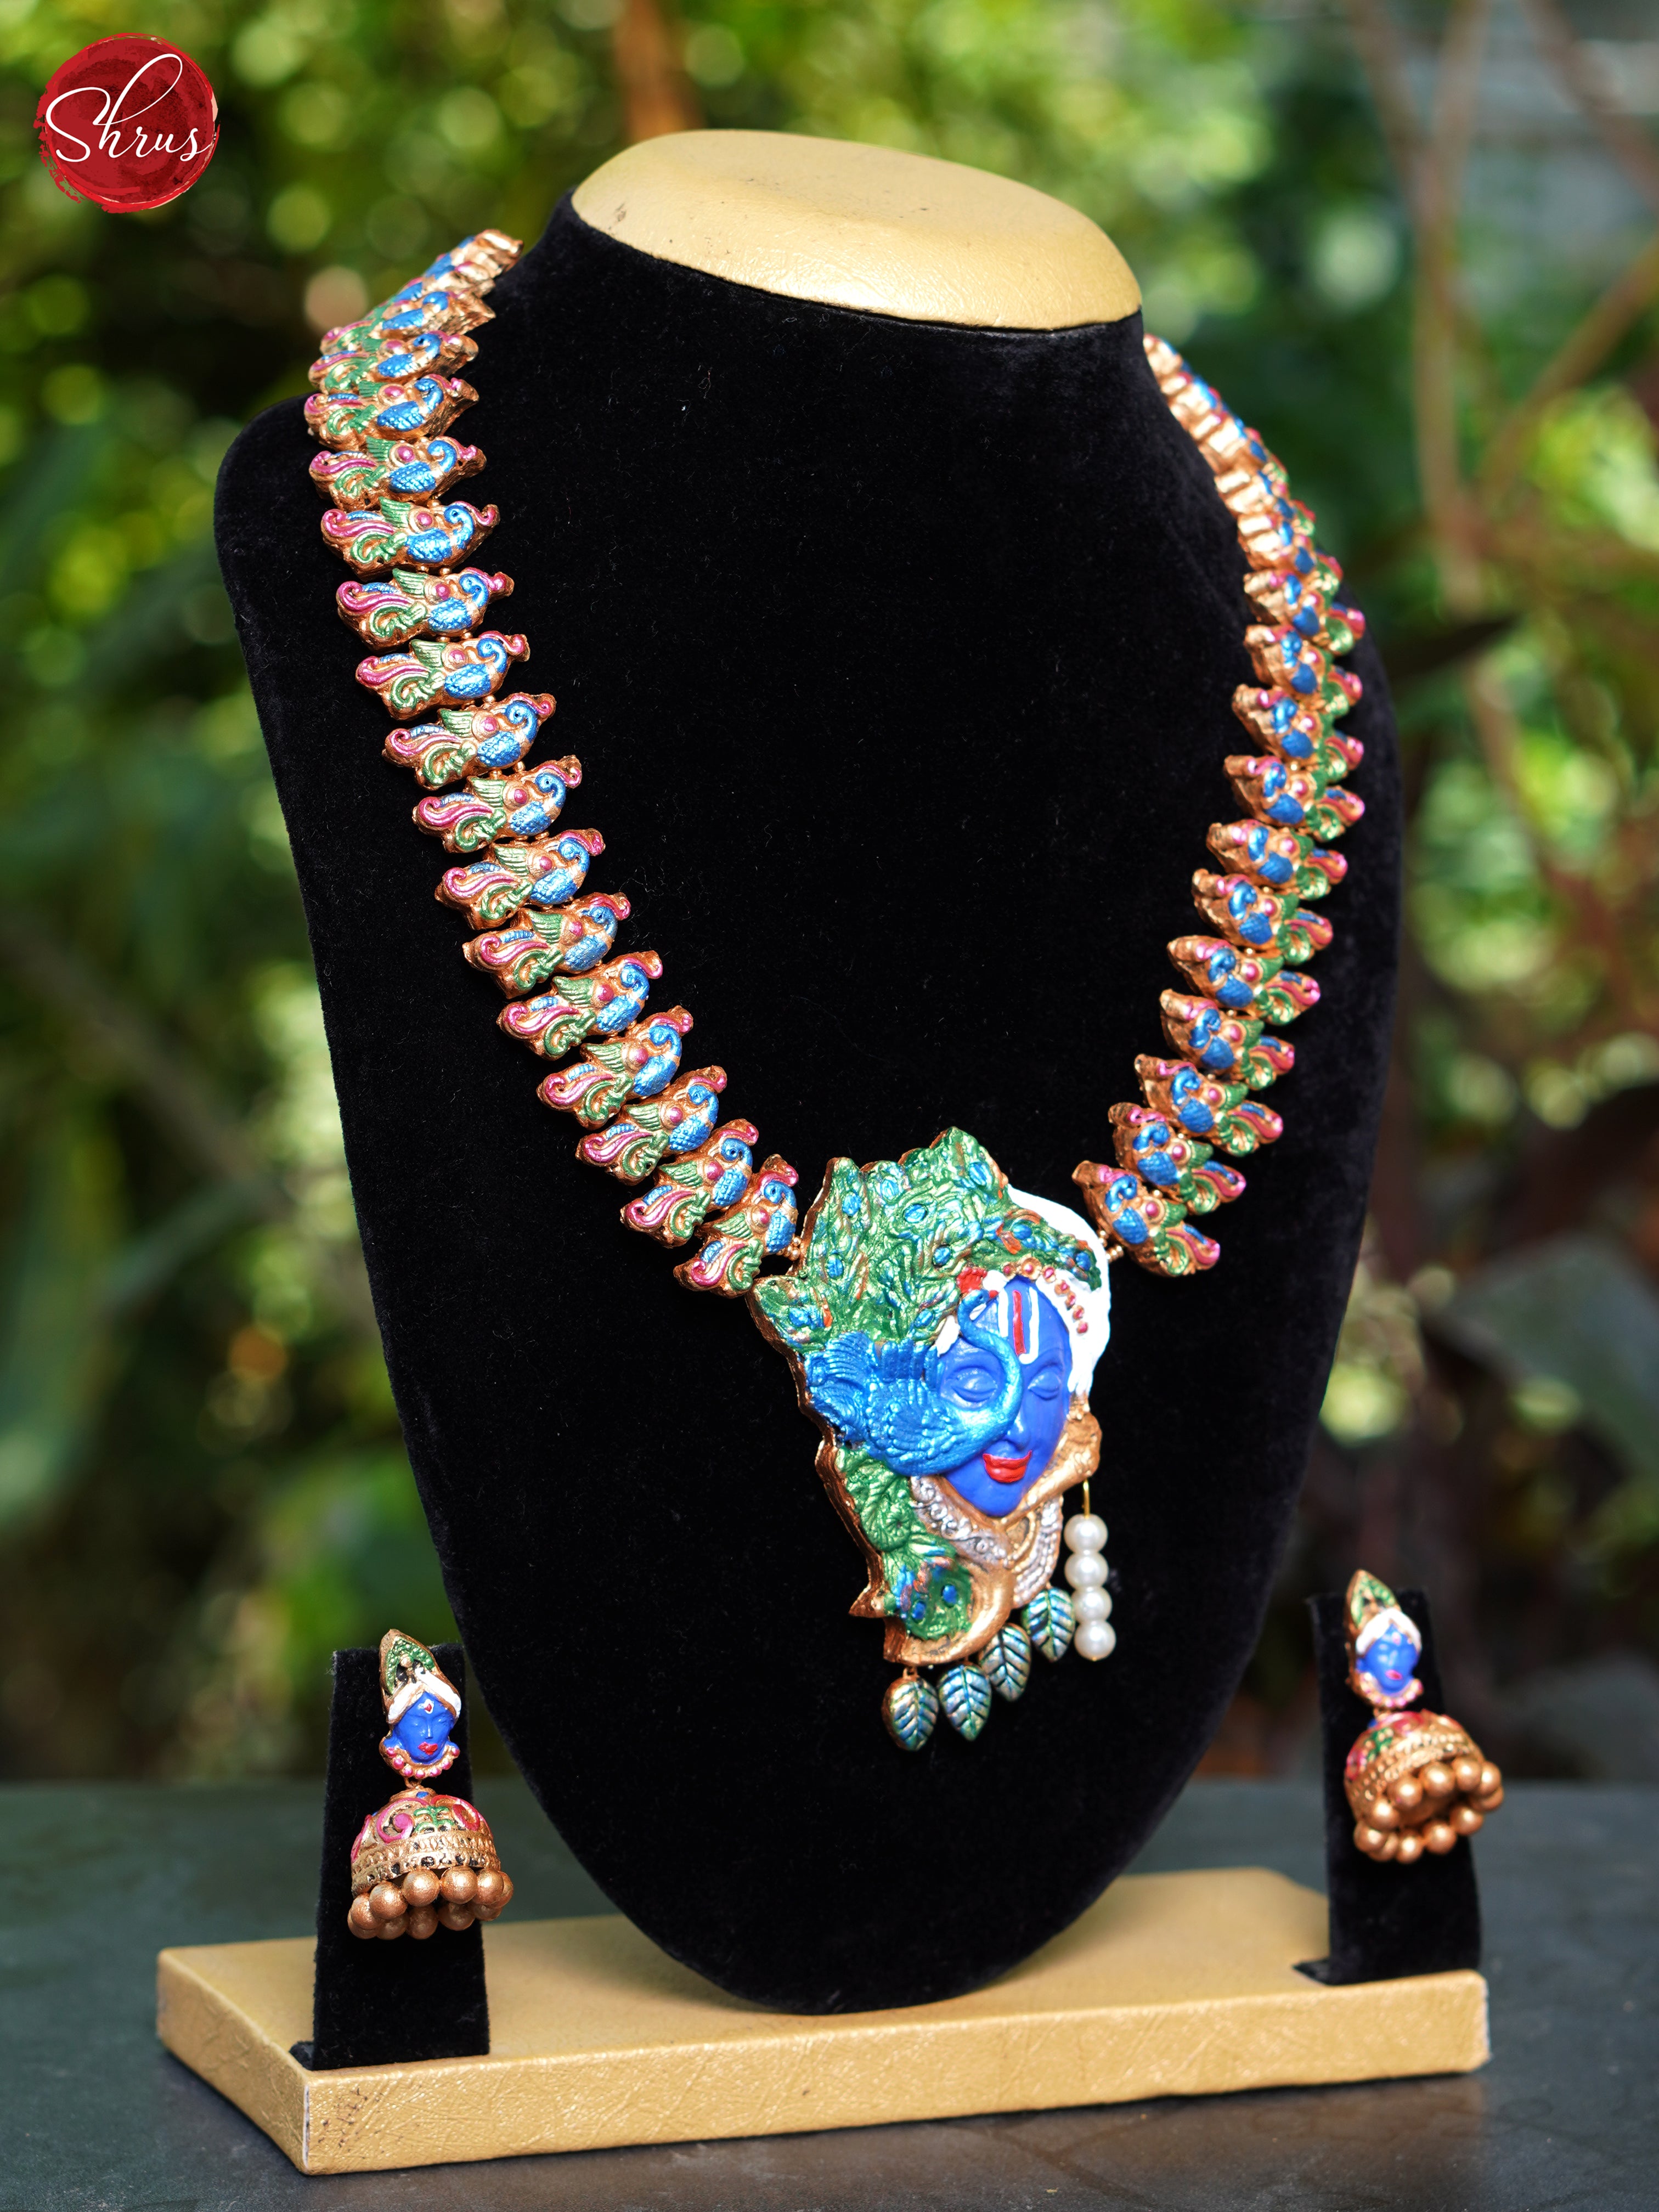 lord krishna , peacock terracotta necklace with  jhumkas  - NECK PIECE & EARRINGS - Shop on ShrusEternity.com